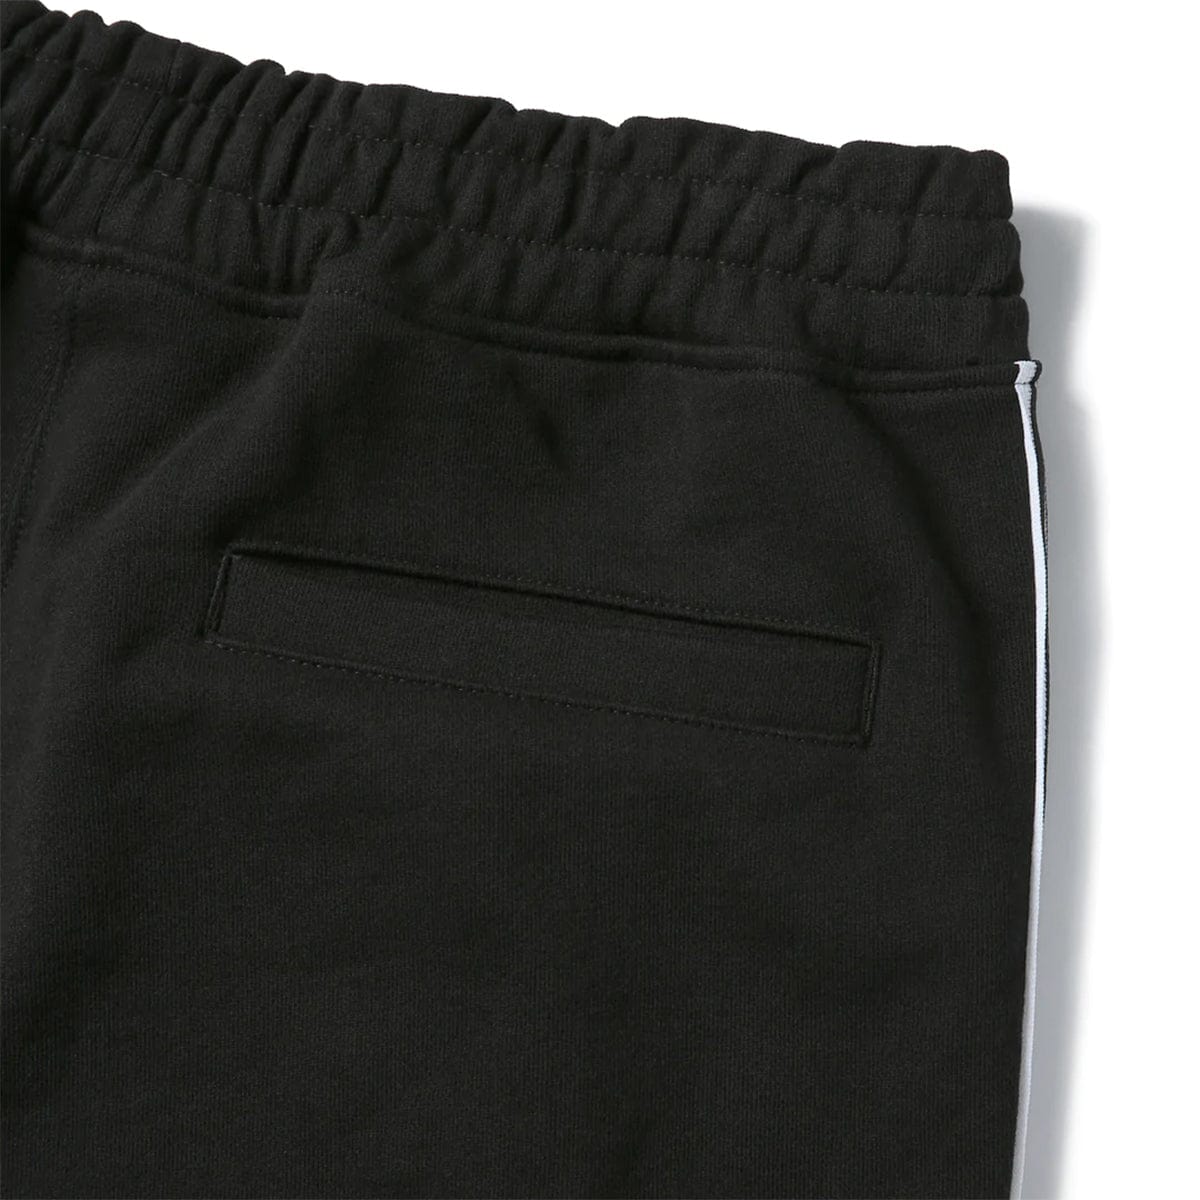 thisisneverthat Bottoms TRACK SWEATPANT